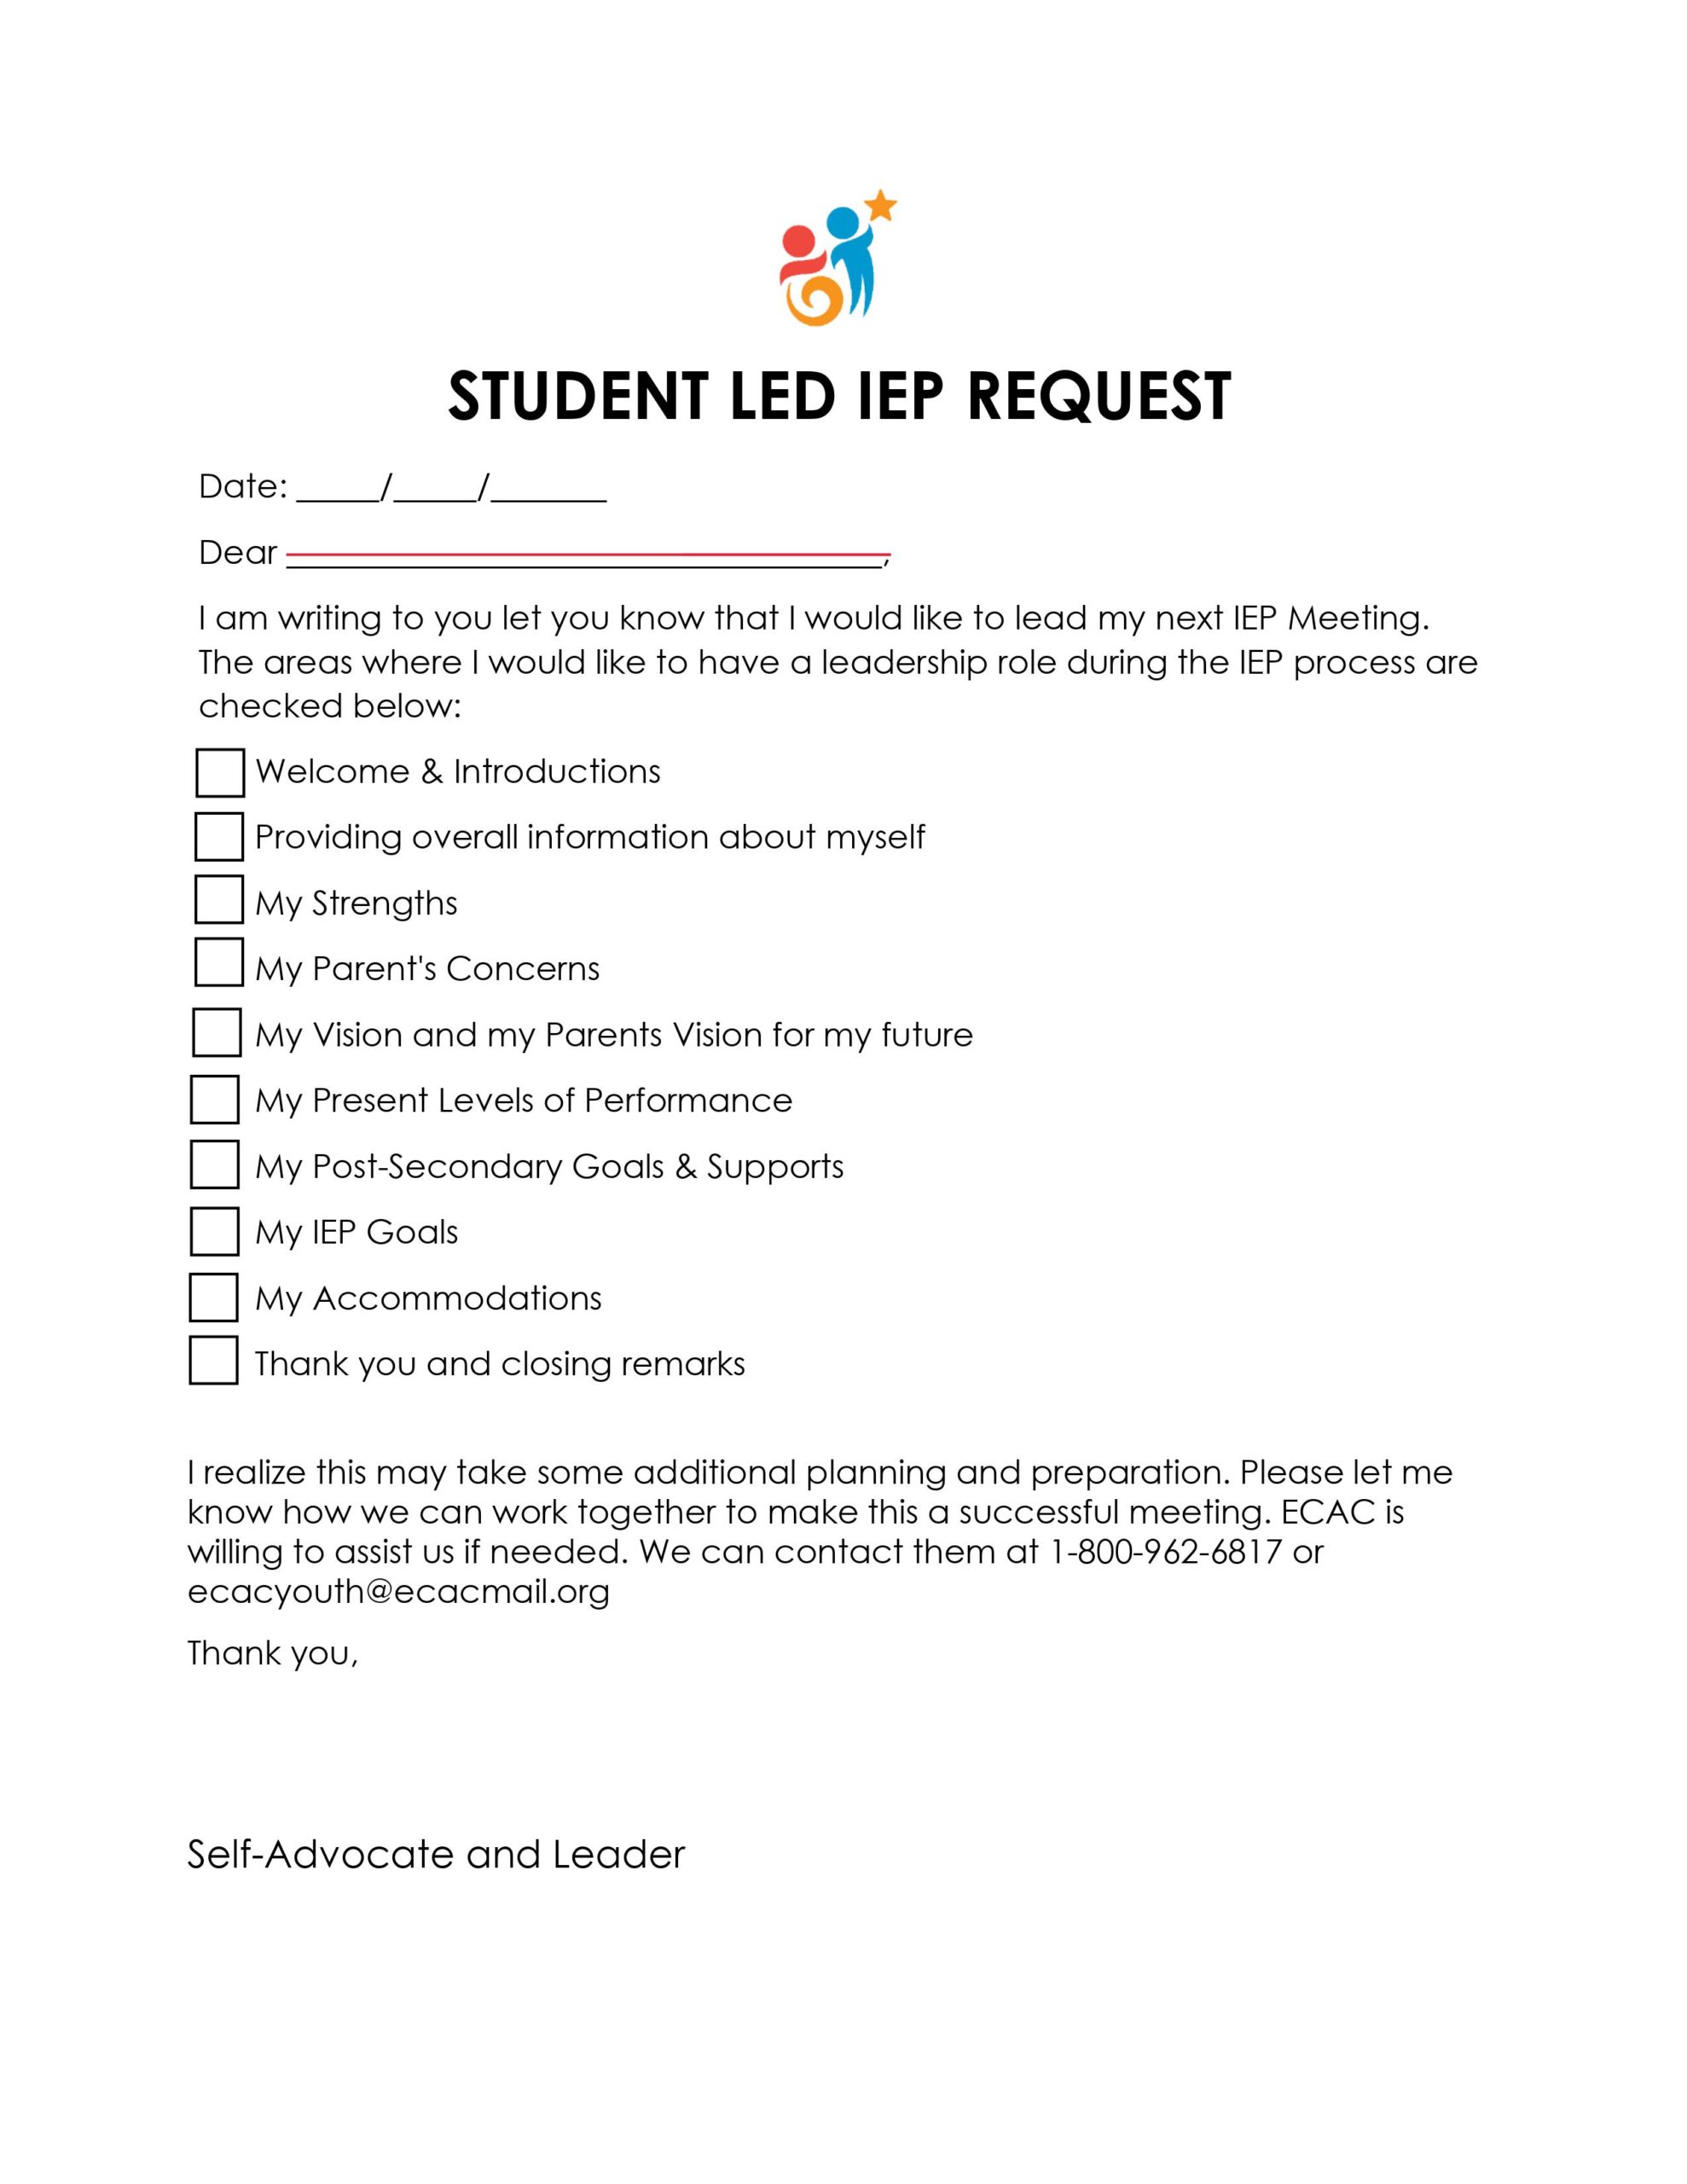 Image of the first page of the Student Led IEP Request form